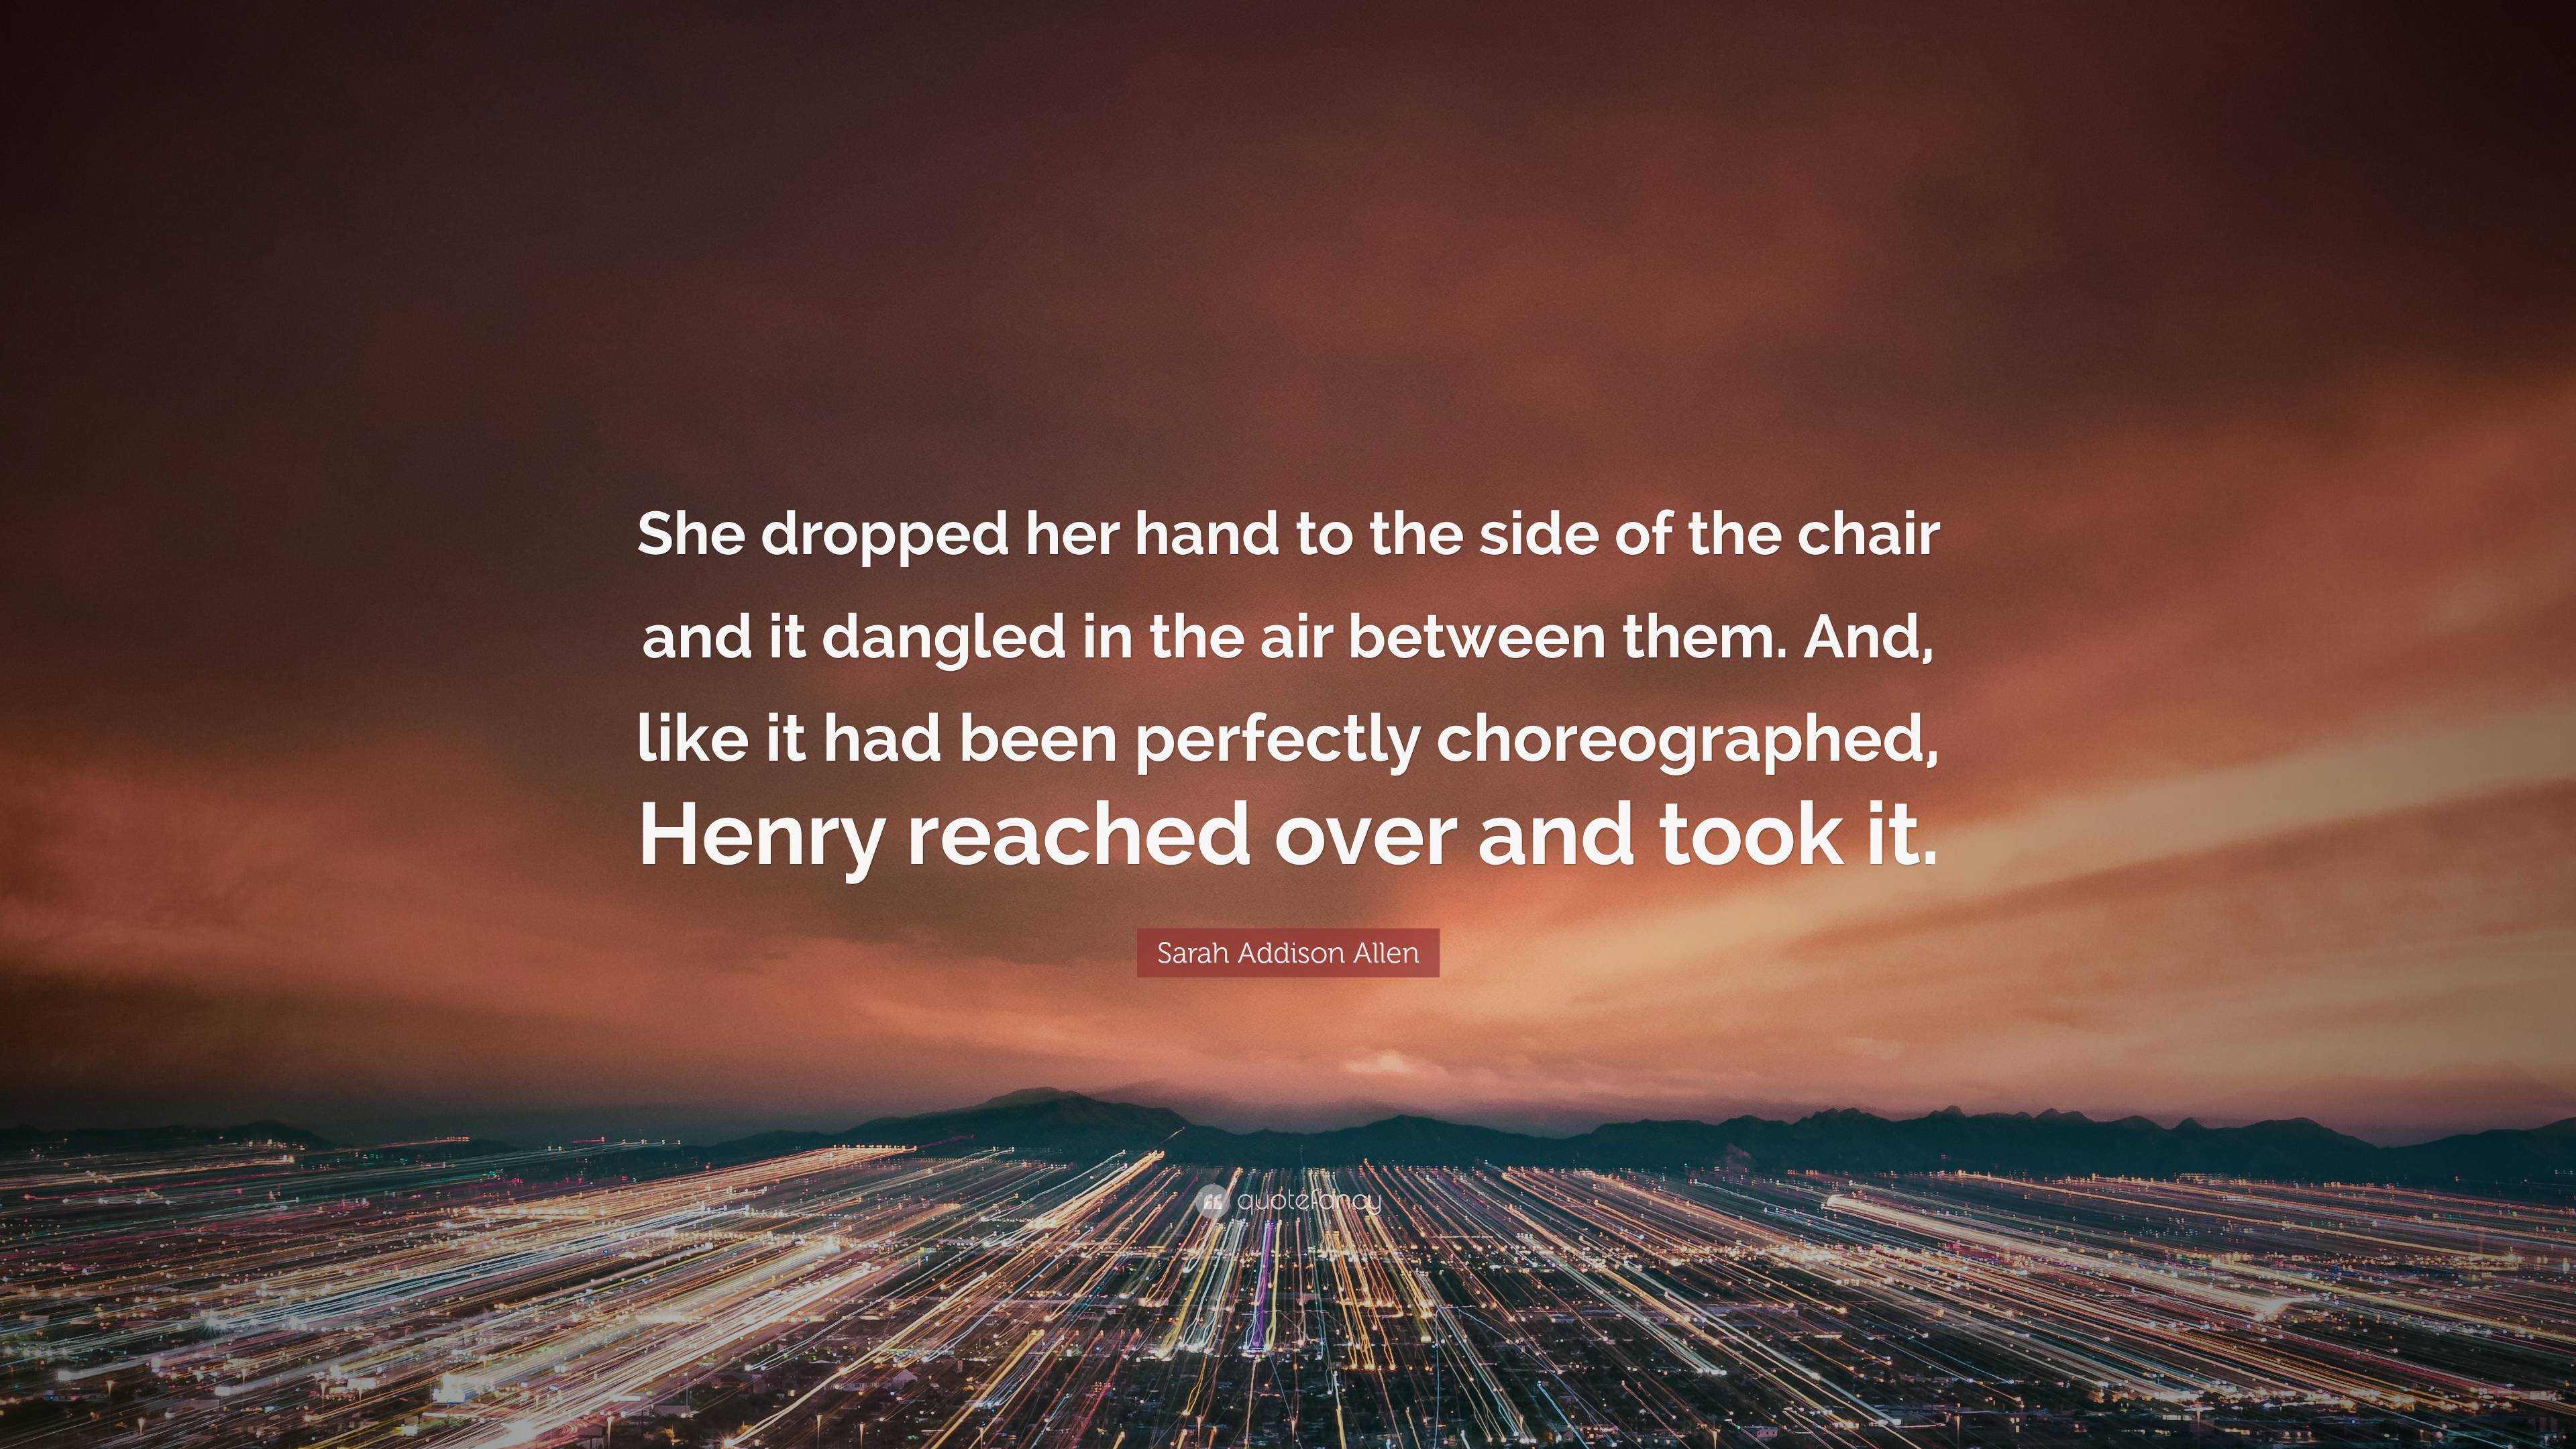 Sarah Addison Allen Quote: “She dropped her hand to the side of the ...